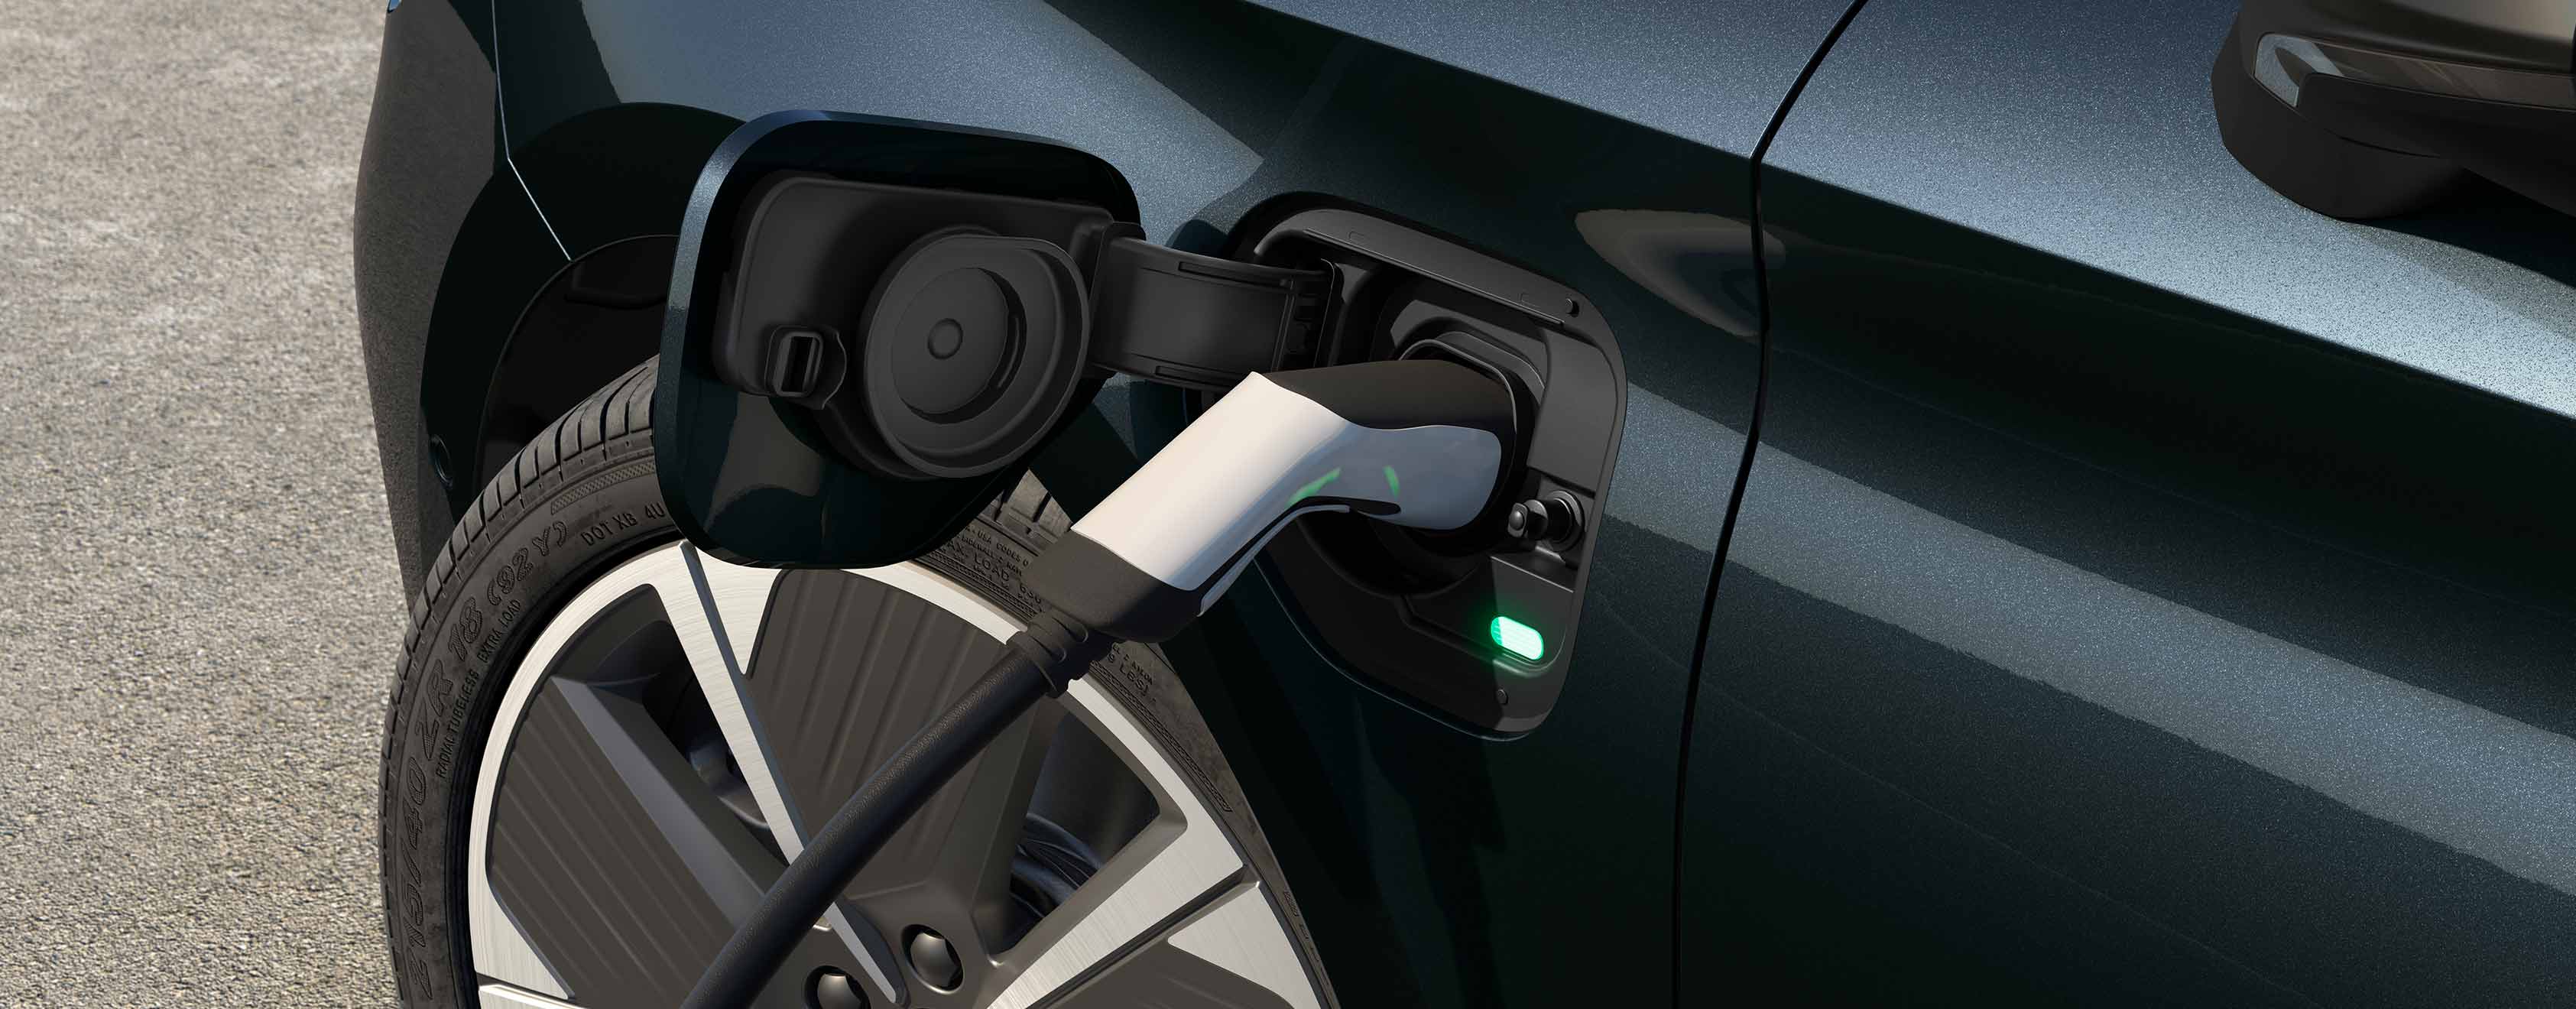 Fully recharge your SEAT electric car at home over night with home wallbox charger for just over £5 